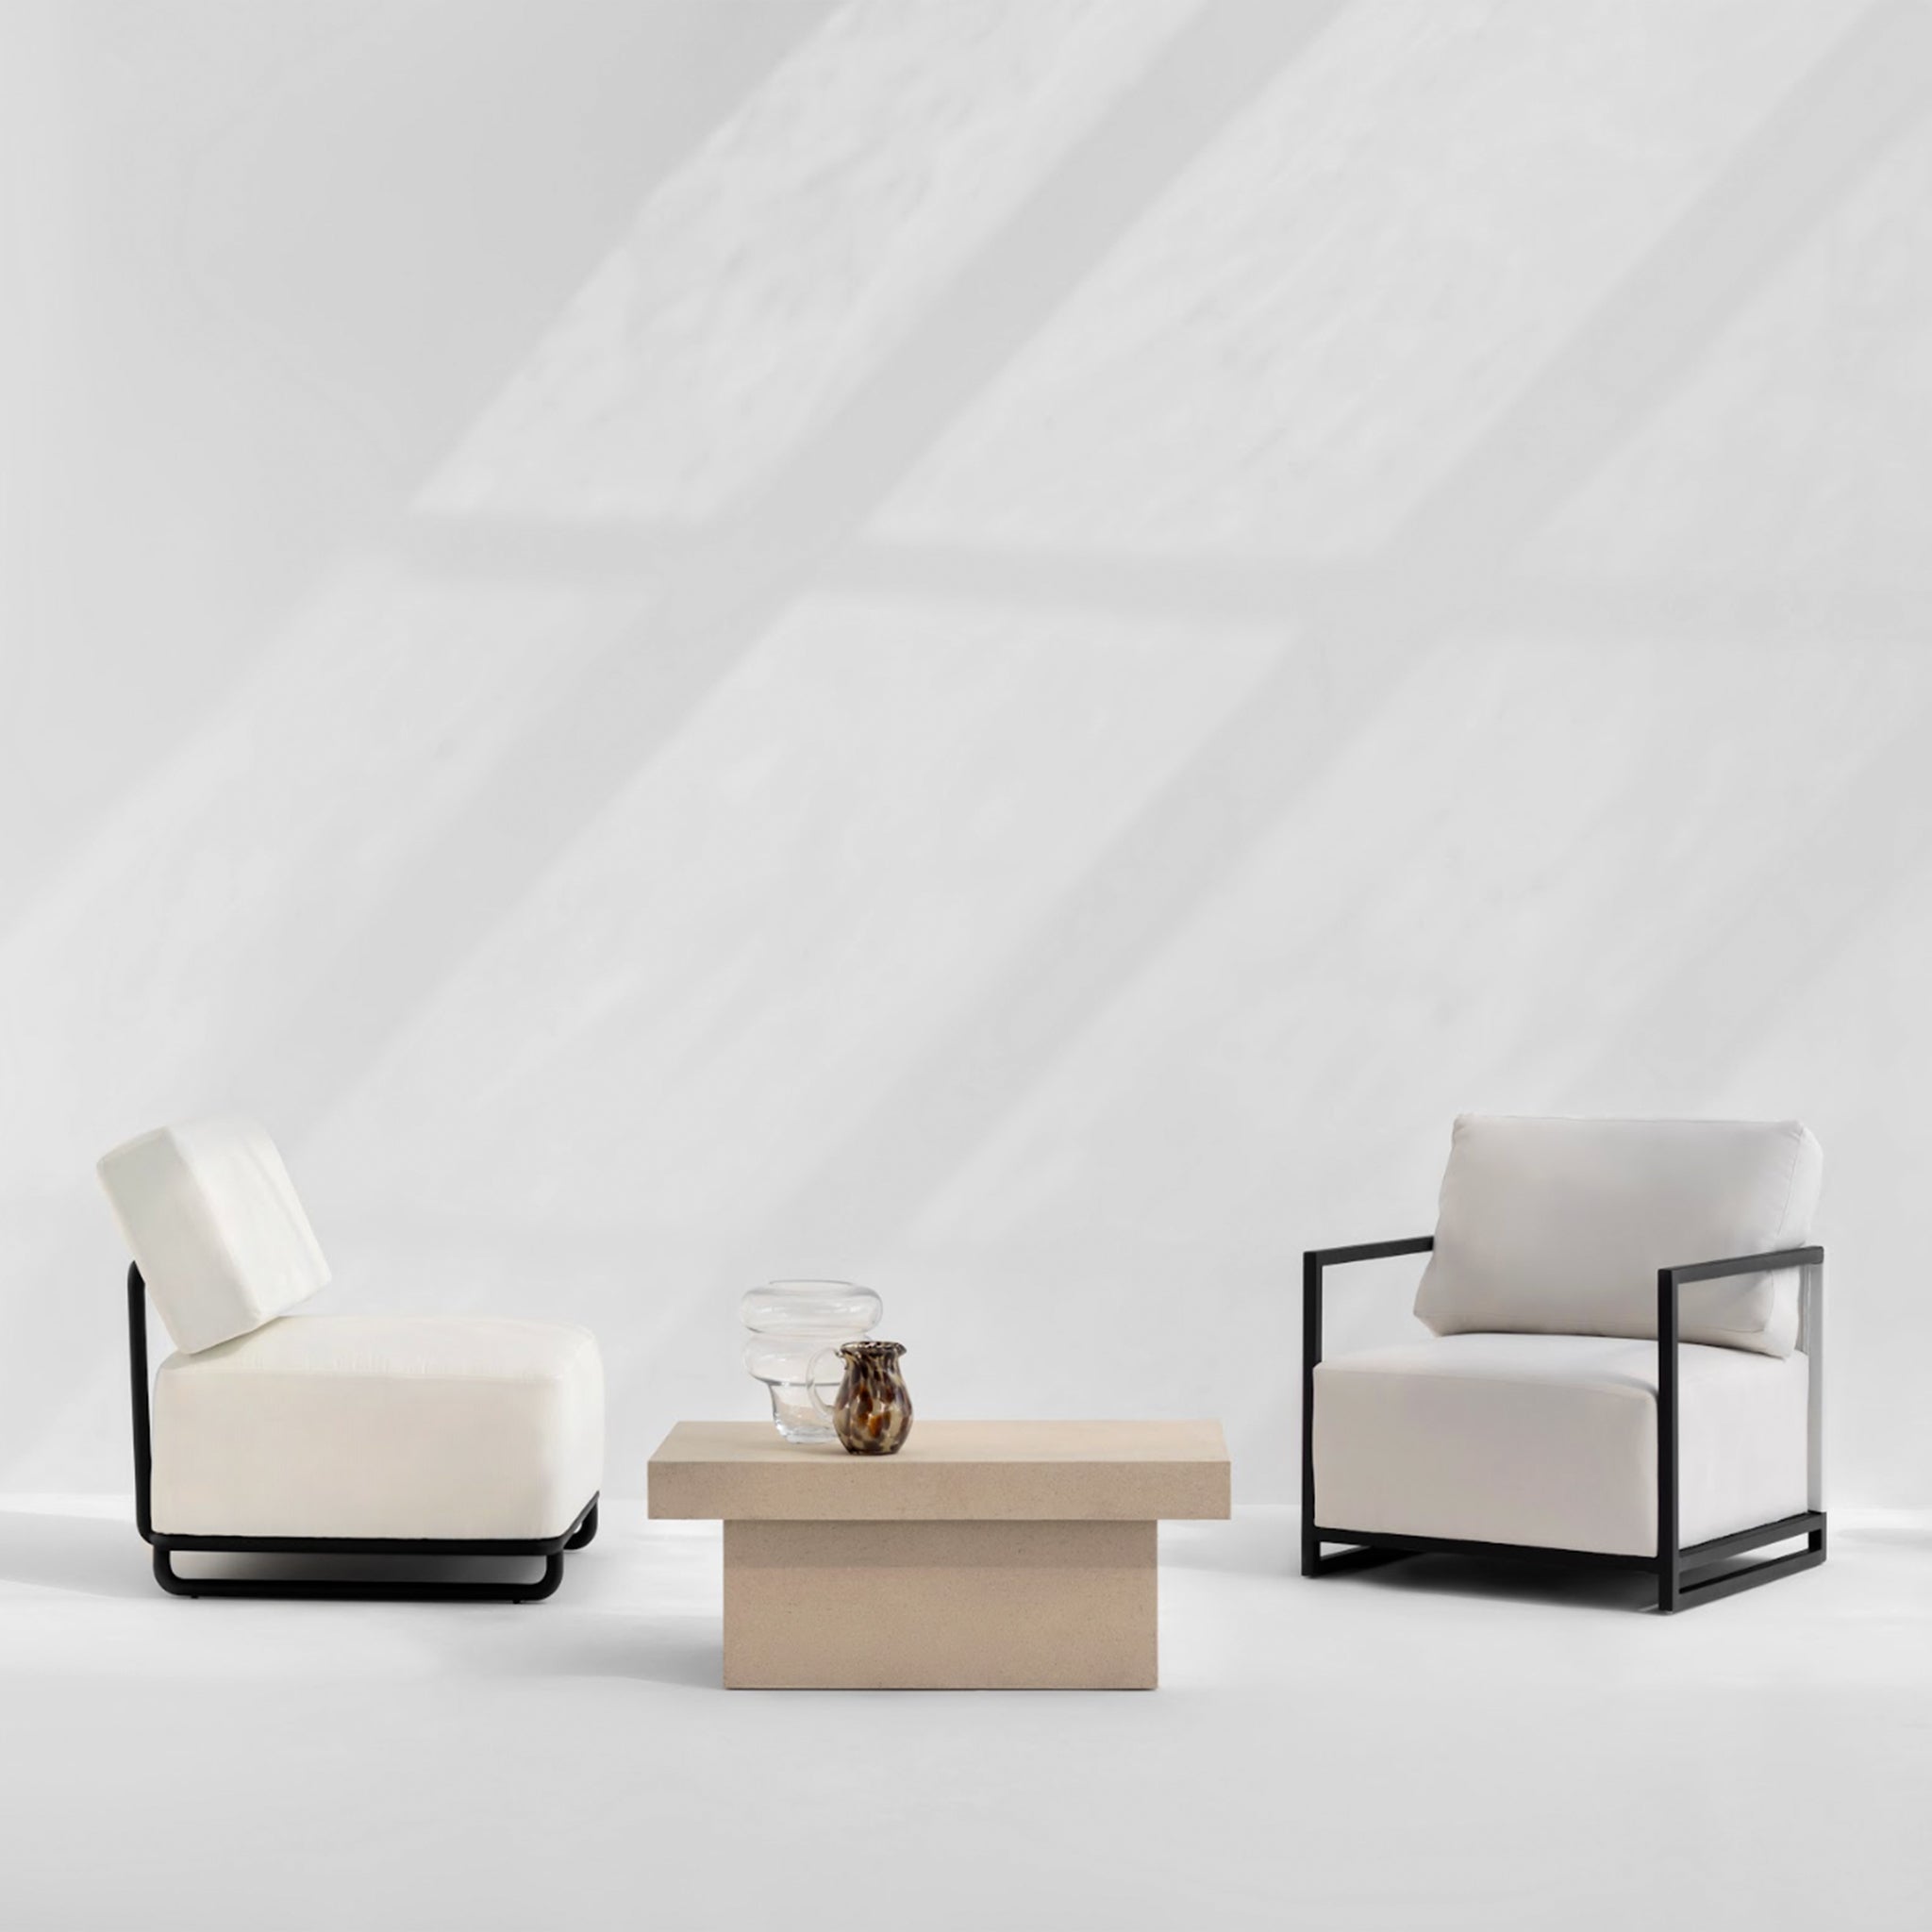 Modern outdoor seating arrangement featuring two Wyth Outdoor Accent Chairs with white cushions and black metal frames, accompanied by a minimalist beige coffee table with decorative glassware.